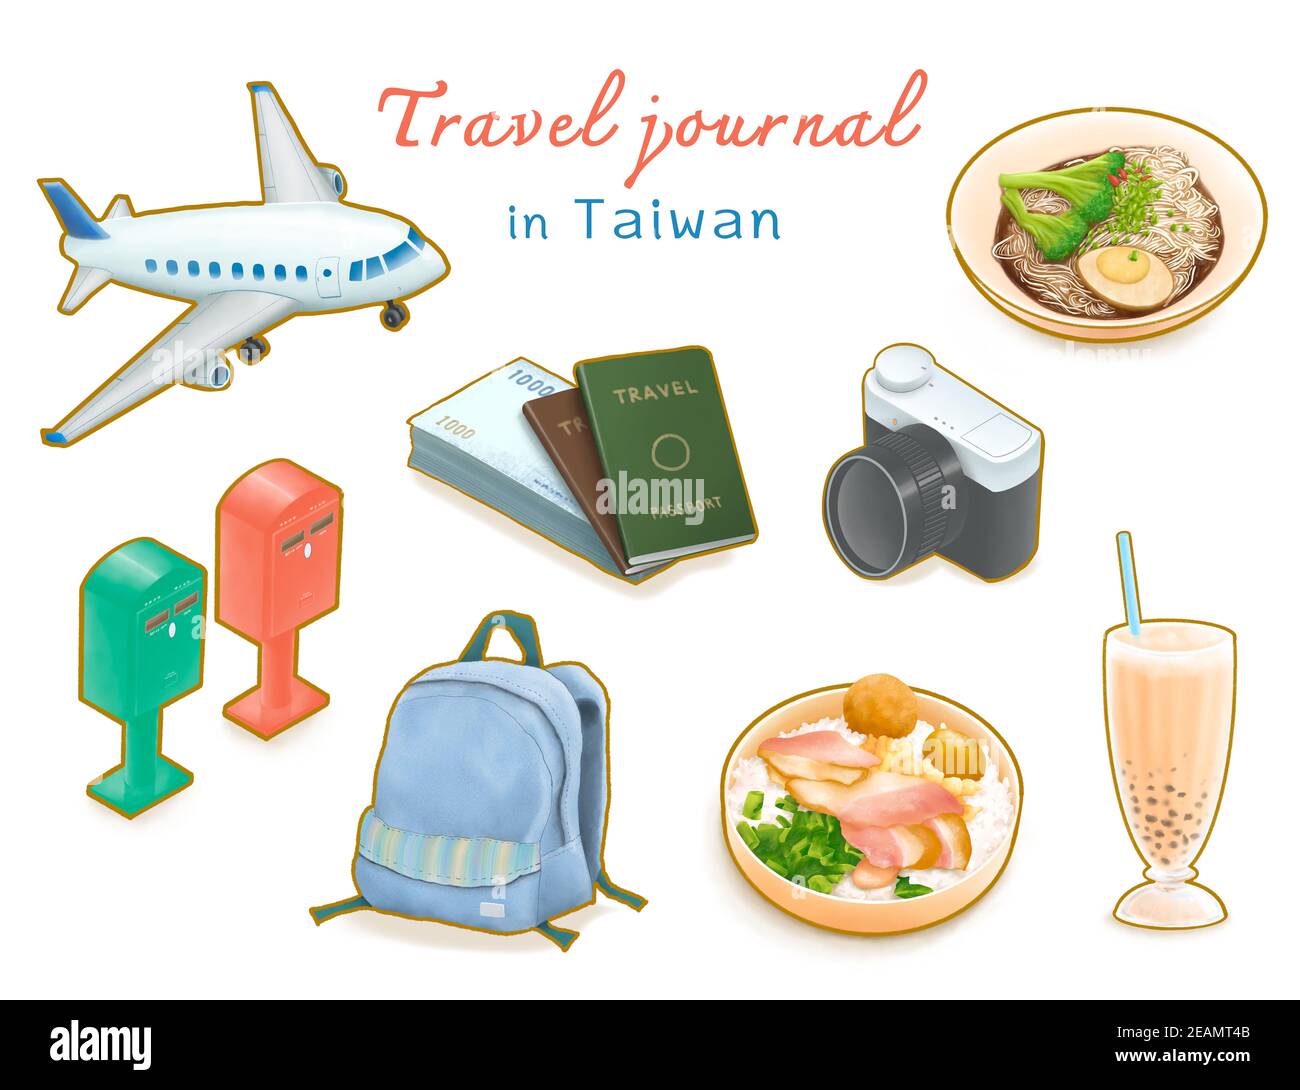 Travel Journal in Taiwan collection, digital painting of airplane, passport, post box, backpack, camera, train lunch box, Taiwanese noodles, bubble te Stock Photo